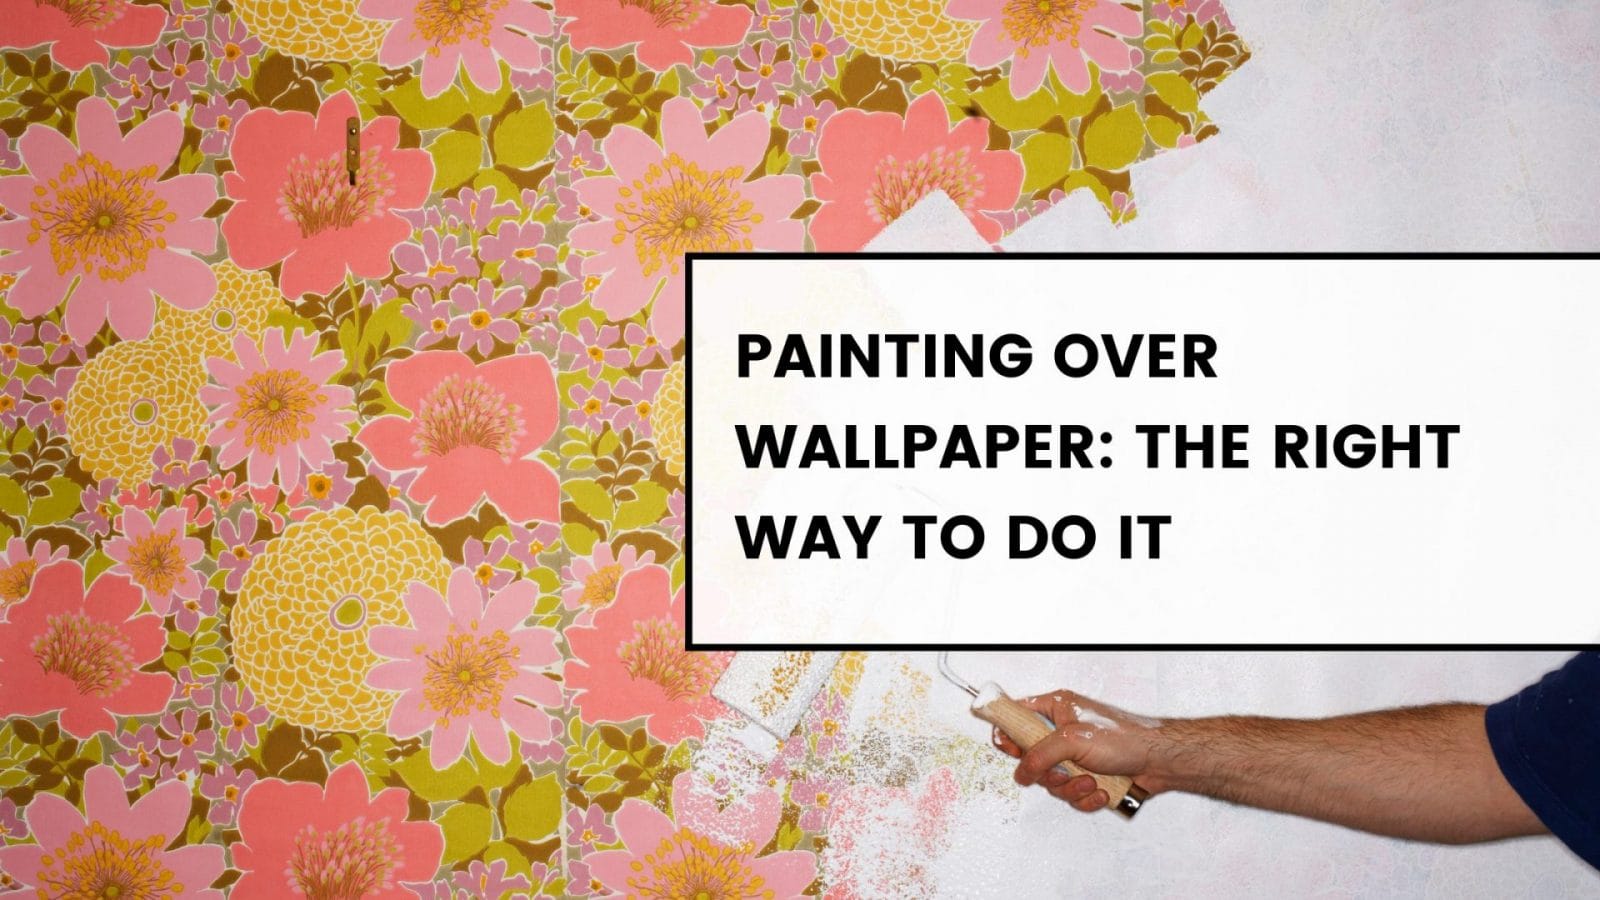 PAINTING OVER WALLPAPER THE RIGHT WAY TO DO IT